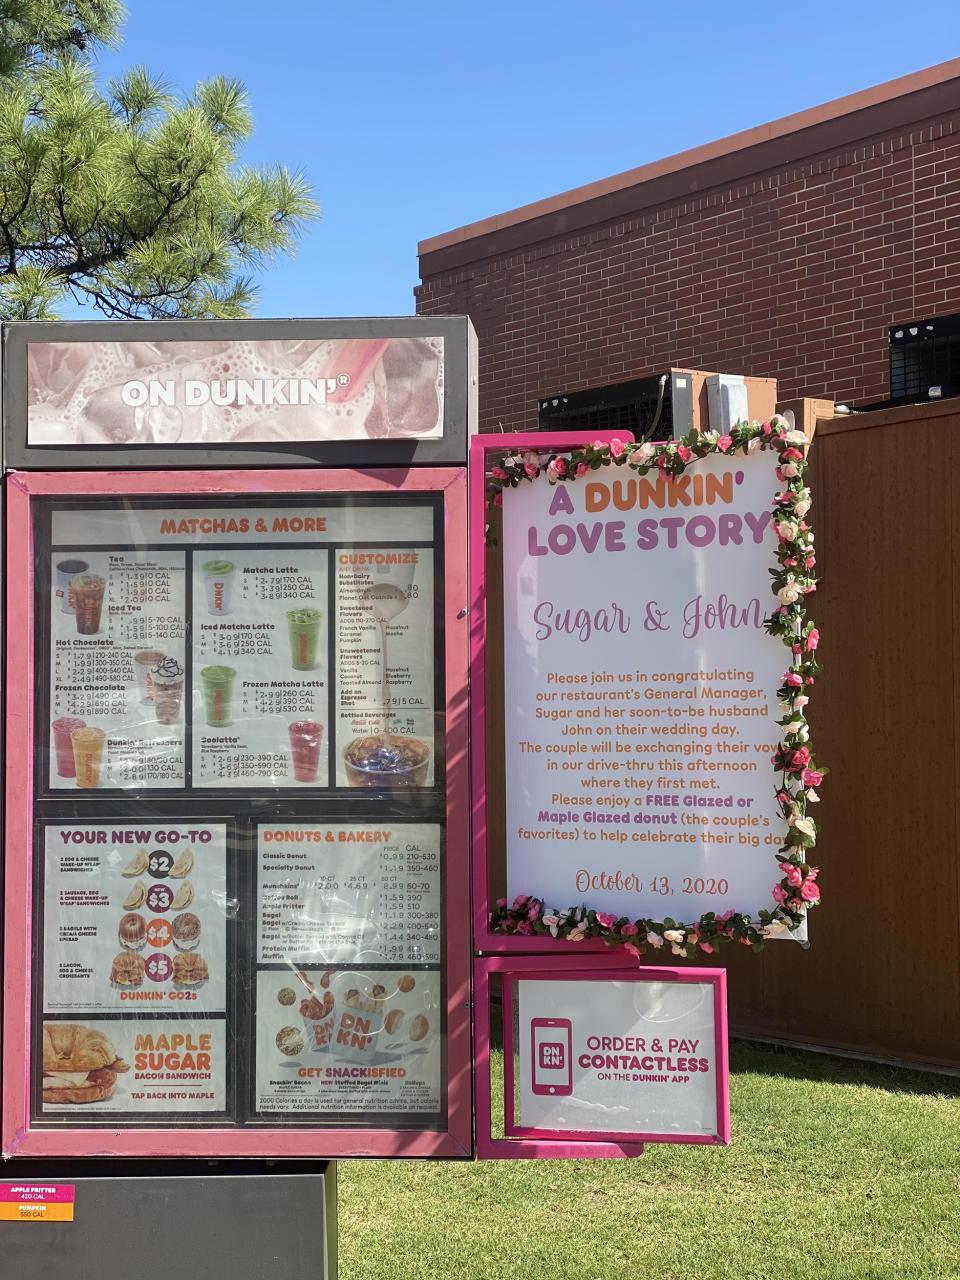 The Dunkin' love story was showcased on the restaurant's menu. (Courtesy Jillian Gallagher and Emma Burke)